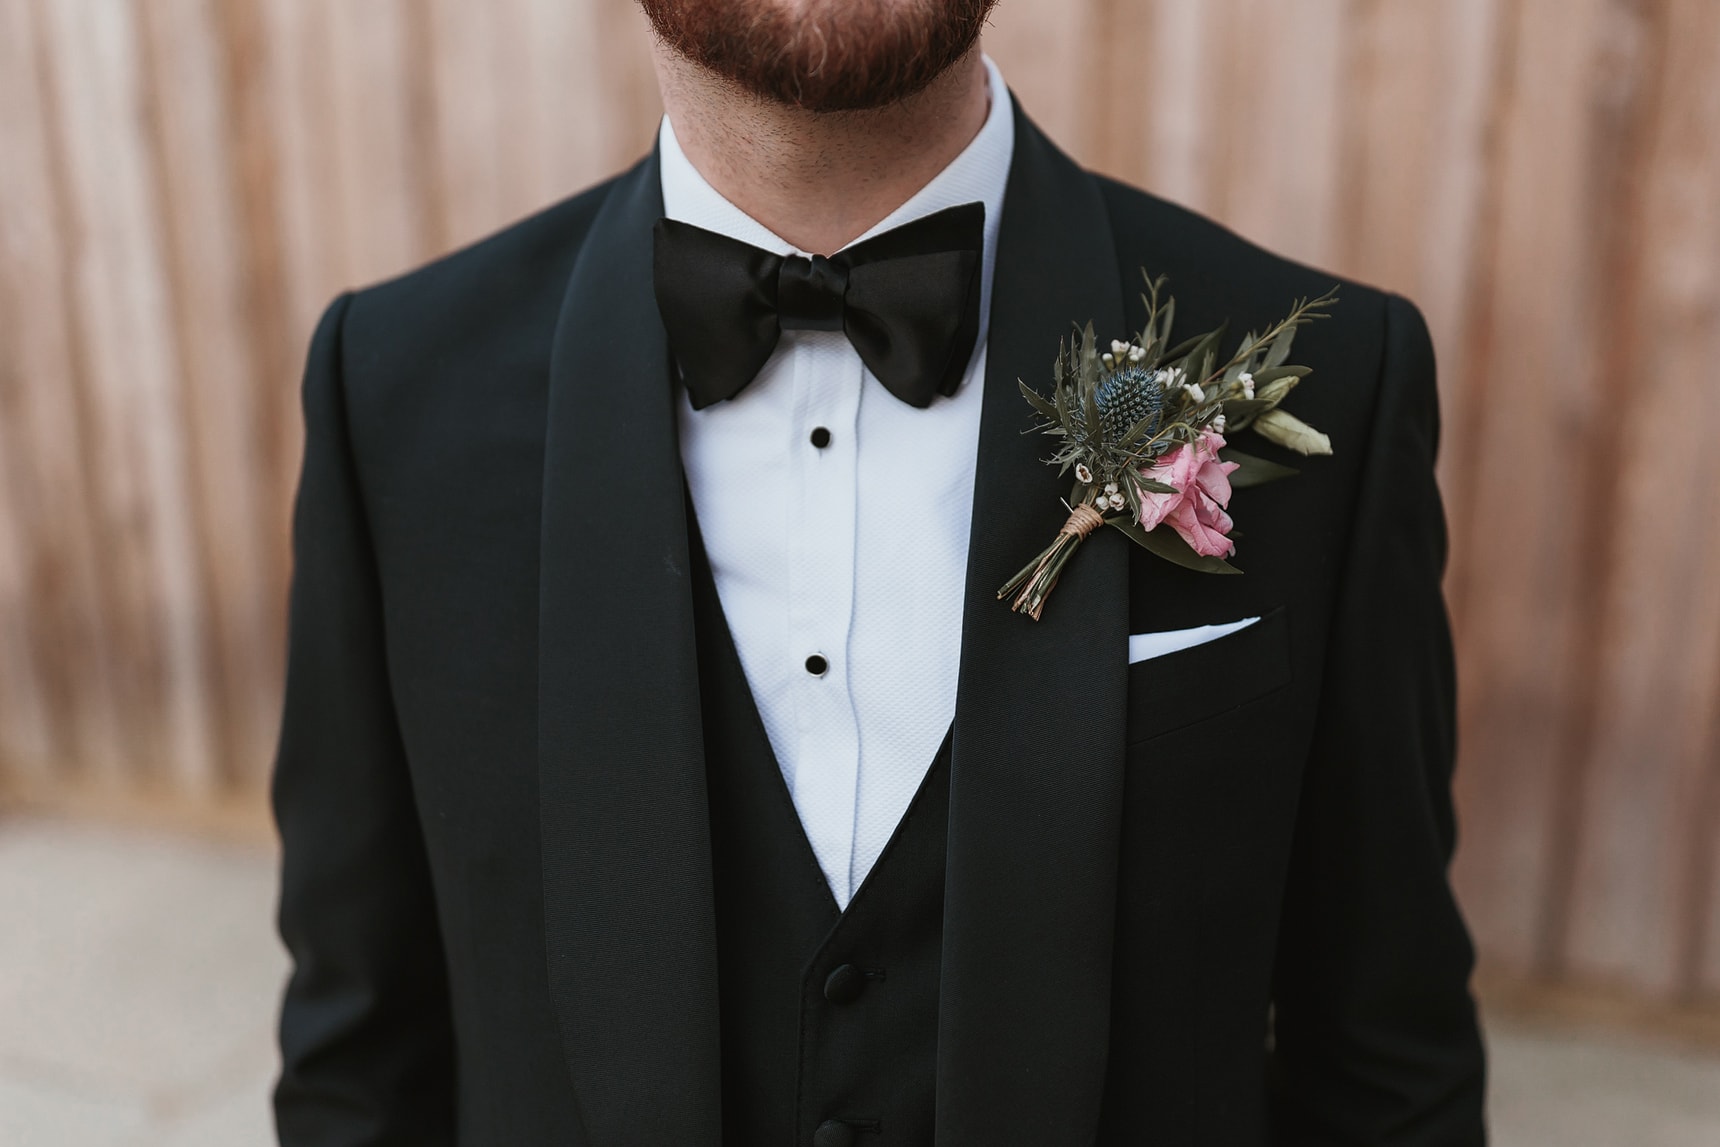 Detailed shot of the grooms Tuxedo and buttonhole